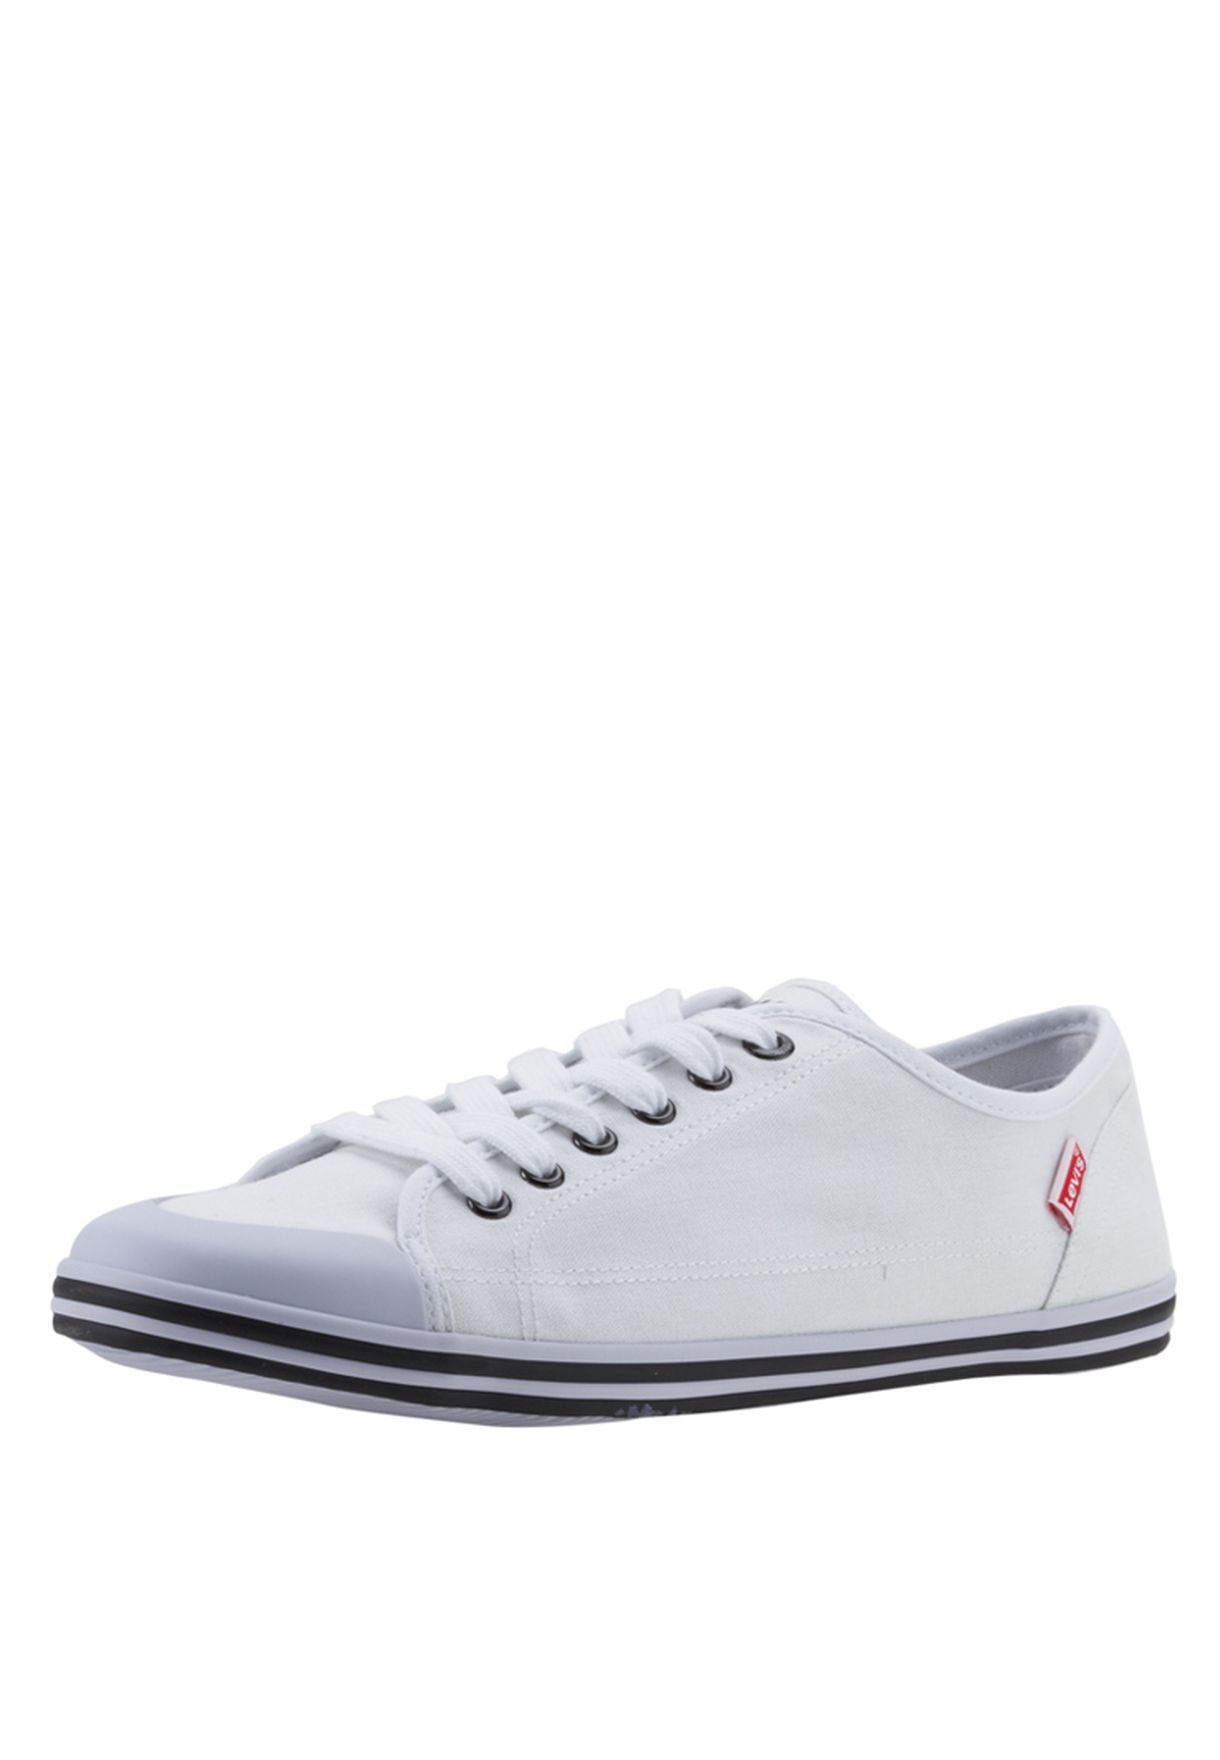 levis white shoes price